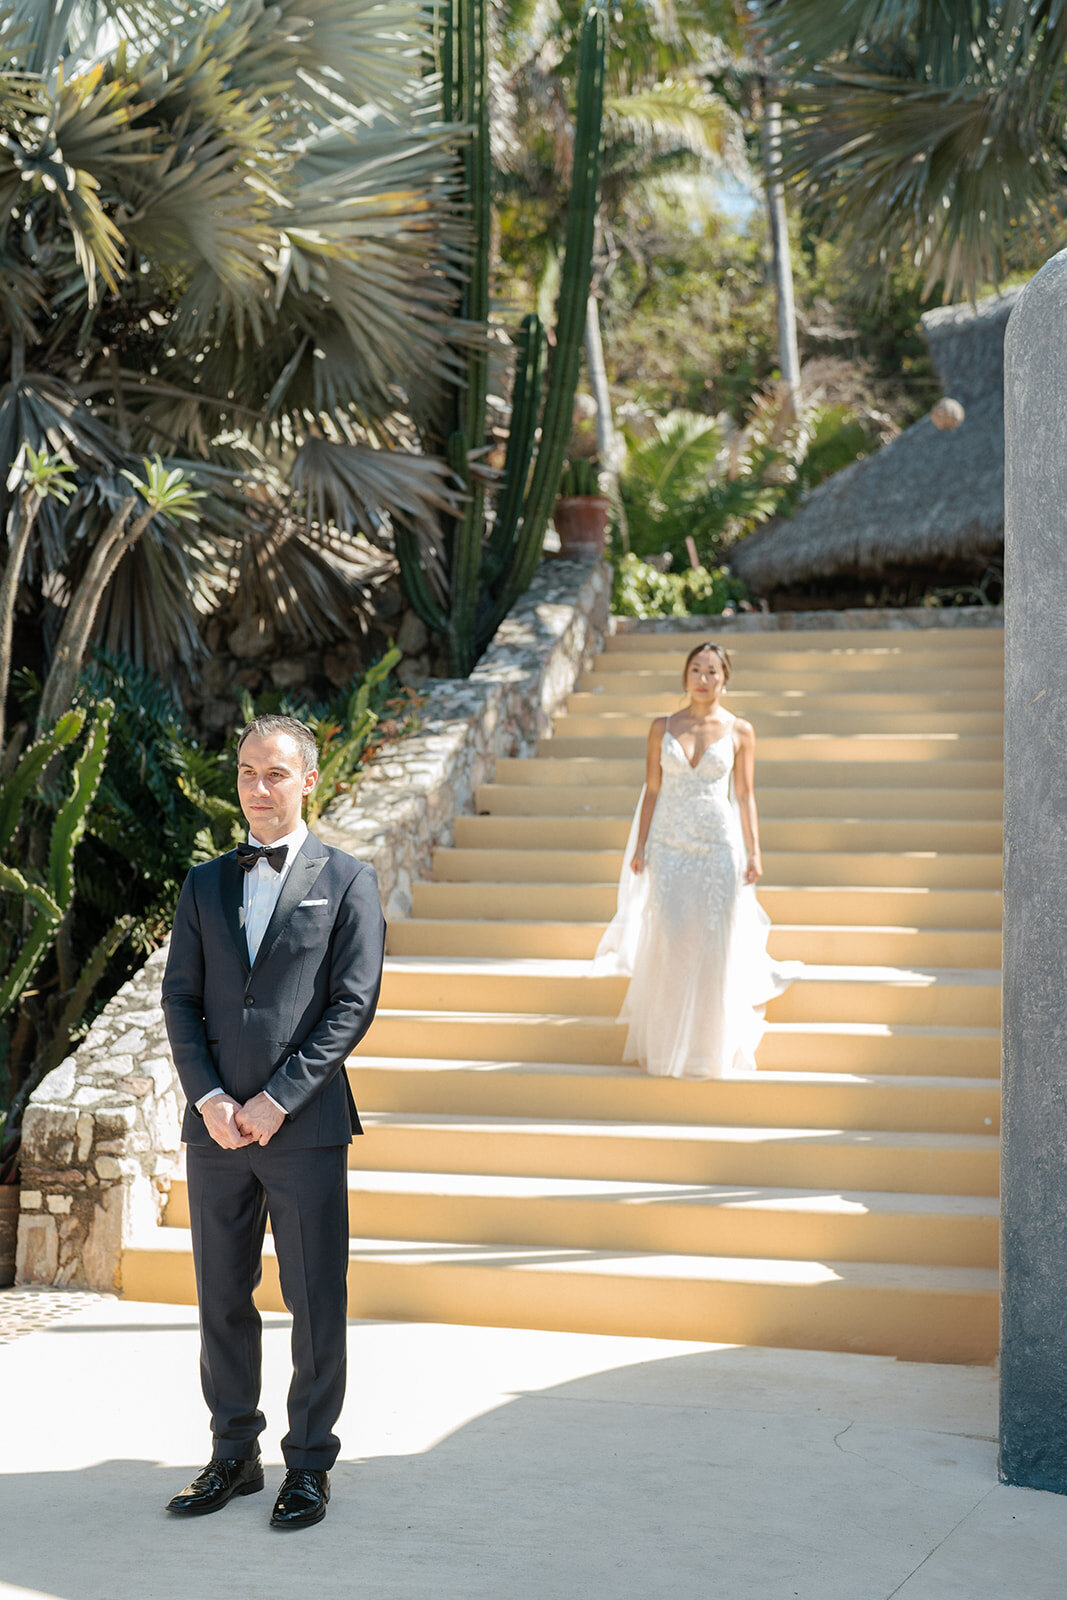 First look at One and Only Palmilla wedding